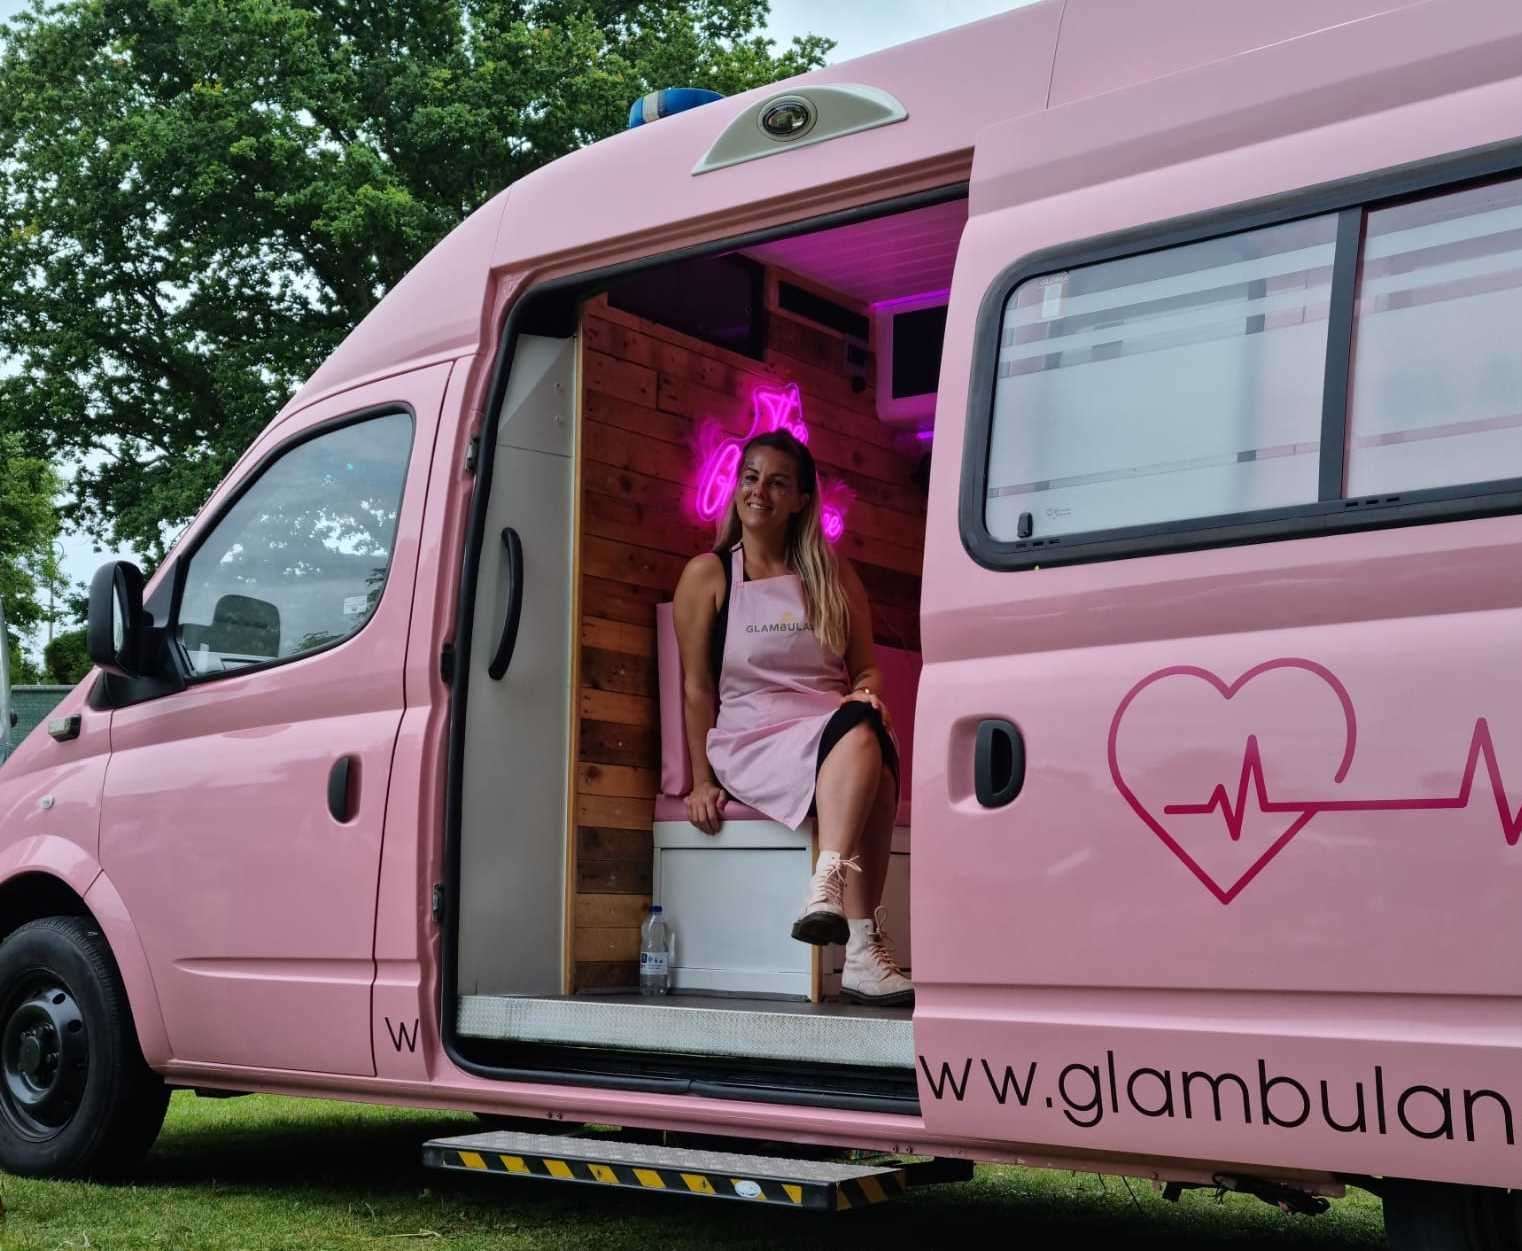 Kirsty Martin with her 'Glambulance'. Credit: Kirsty Martin